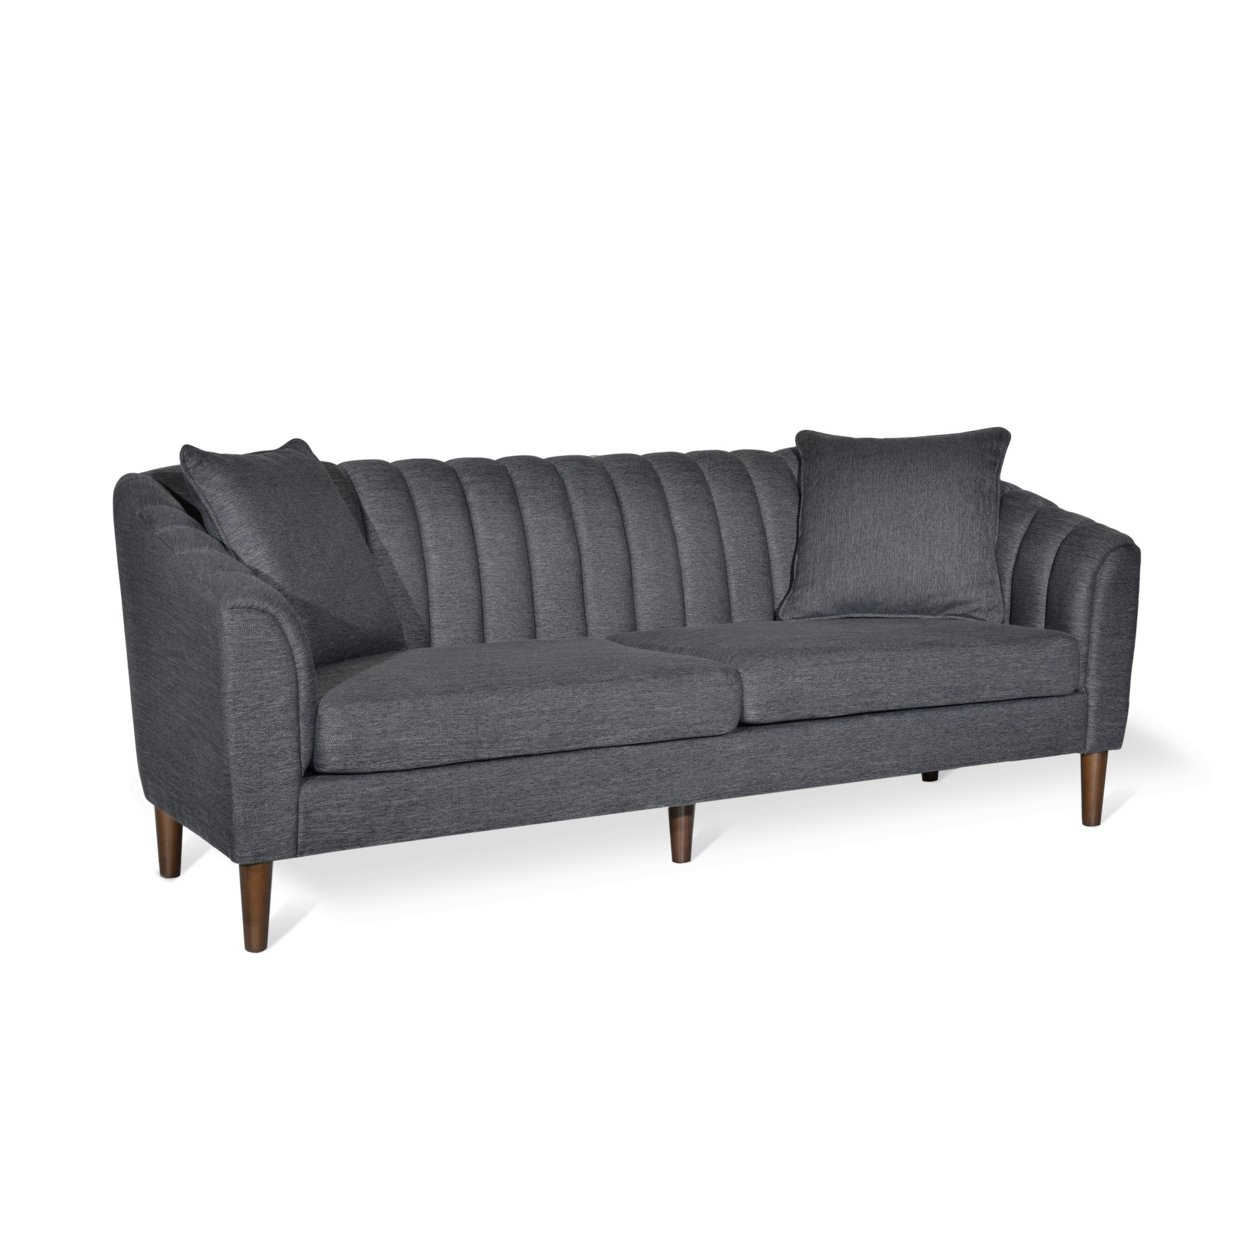 Jeannie Contemporary Fabric 3 Seater Sofa - Charcoal